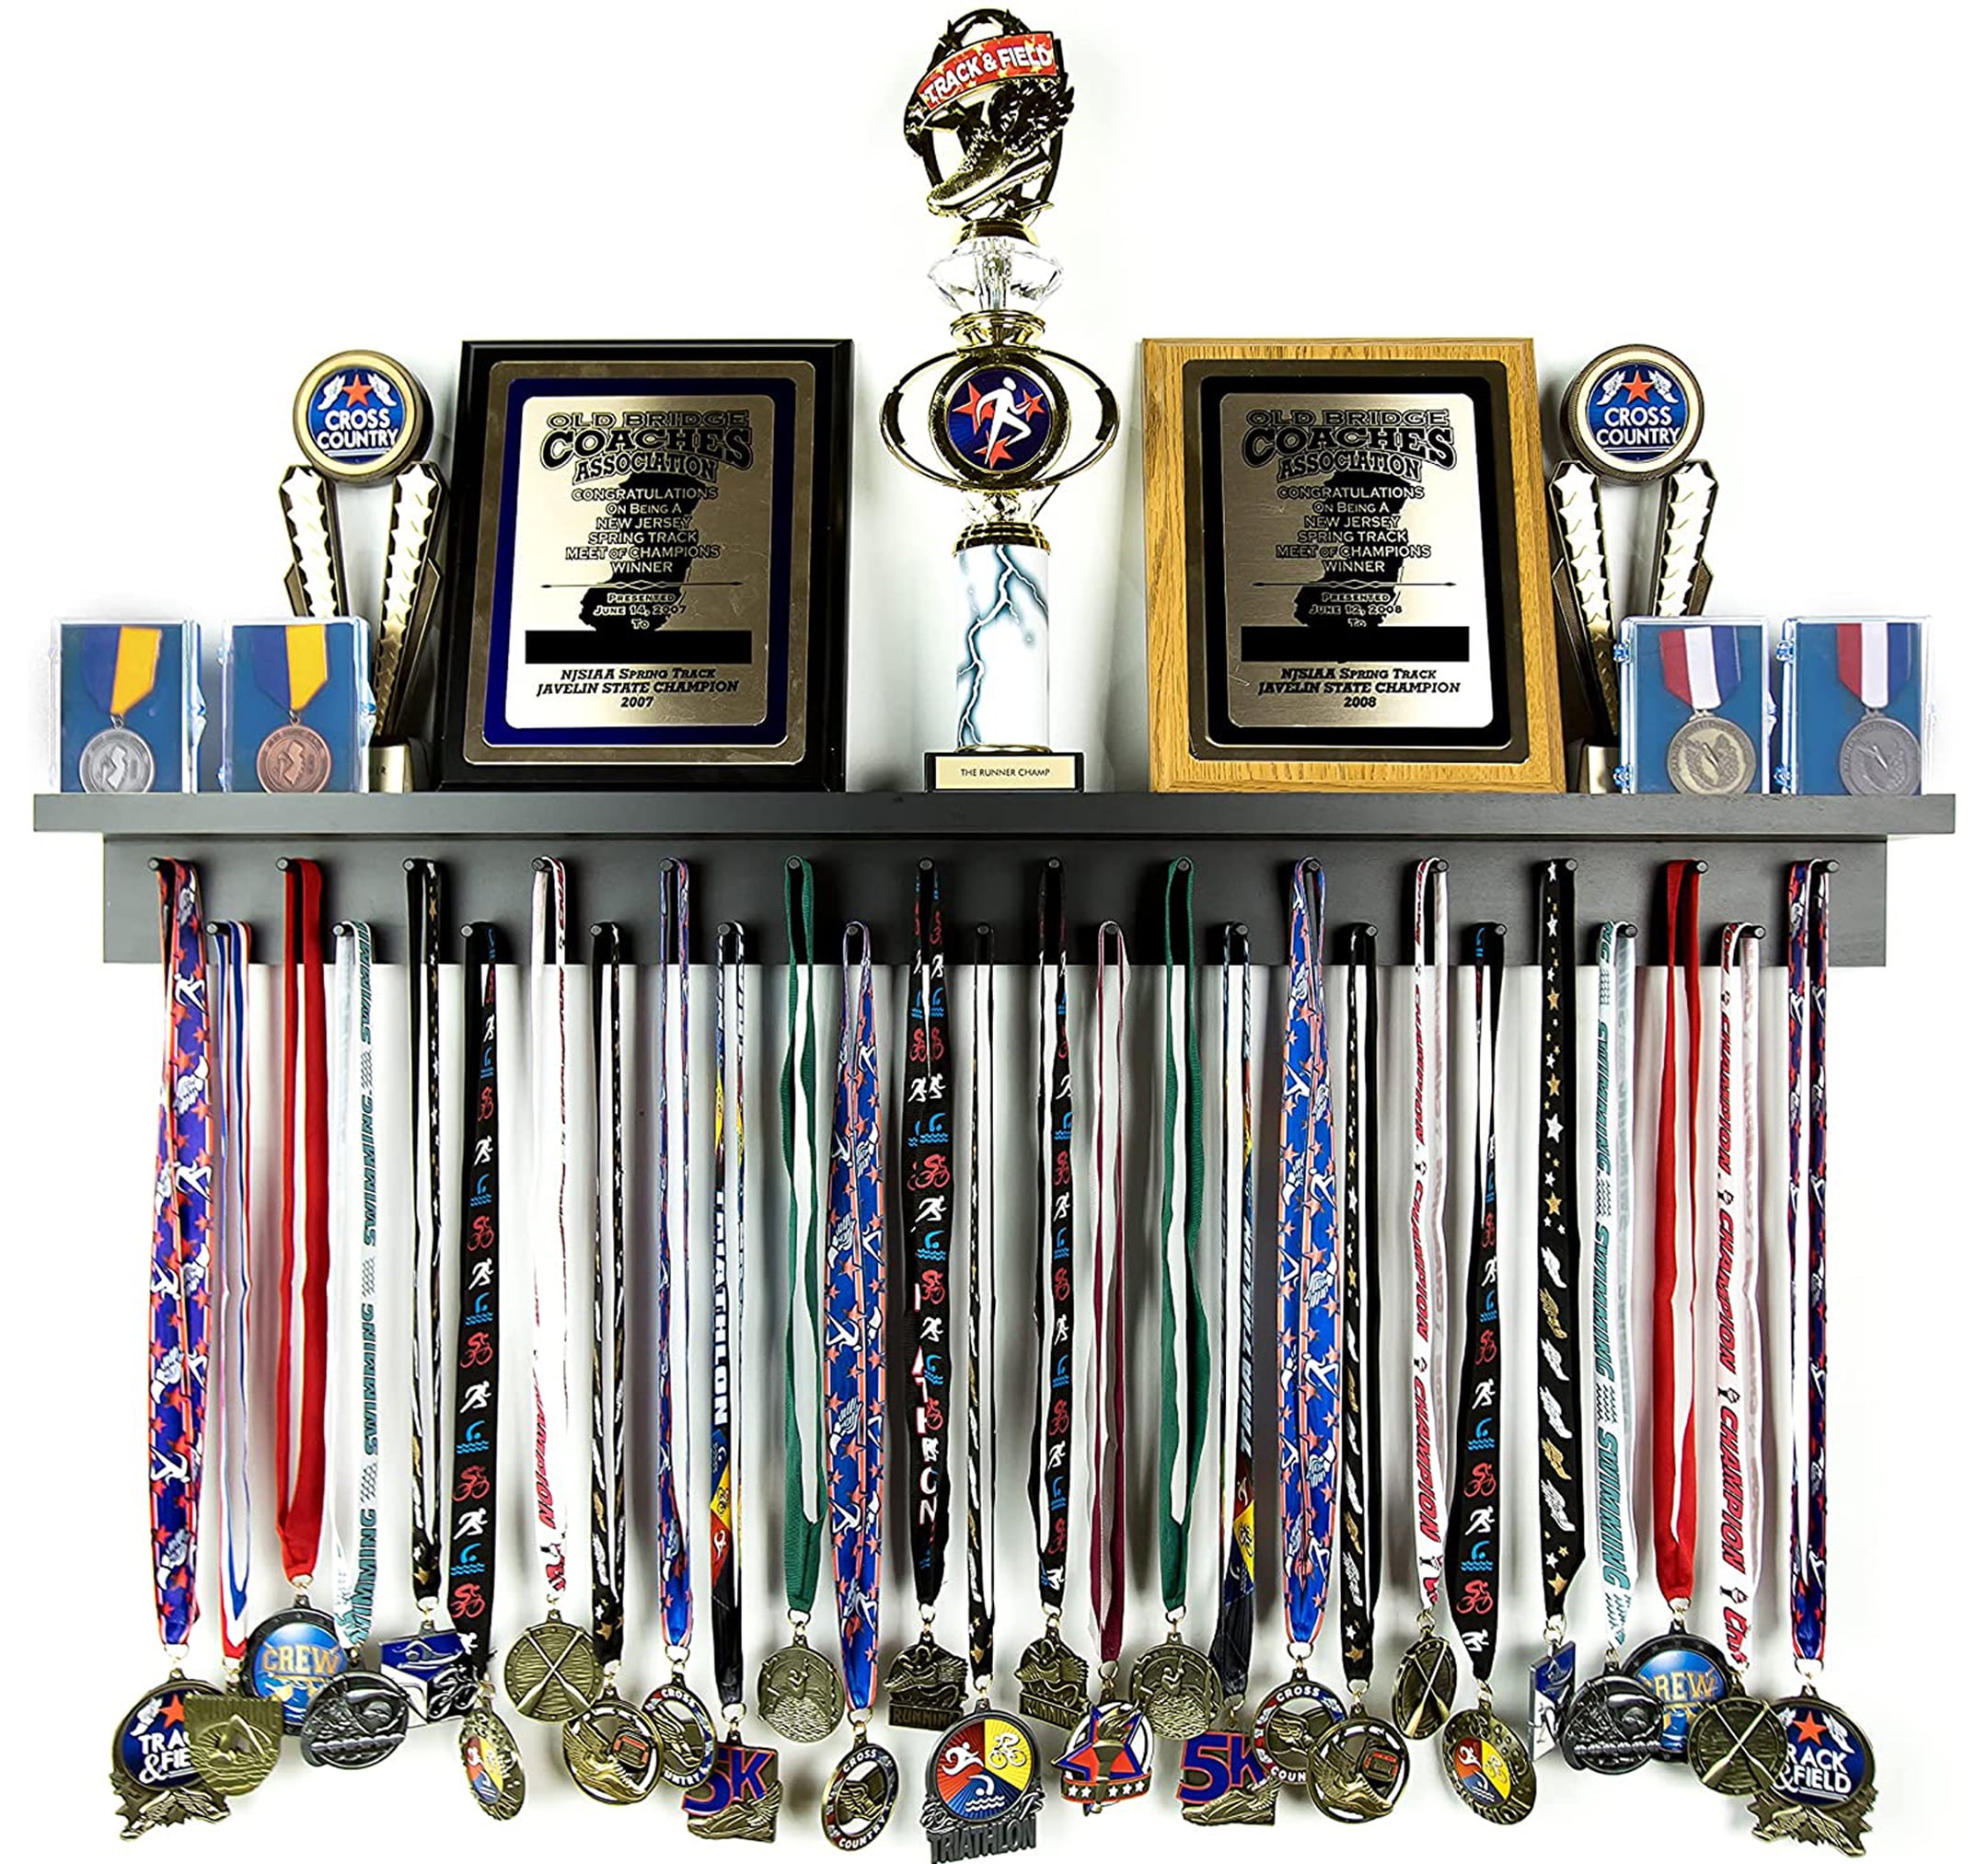 Express Medals Various 10 Pack Styles of Auto Racing Flag Award Medals with Neck Ribbons Trophy Award Prize Gift 